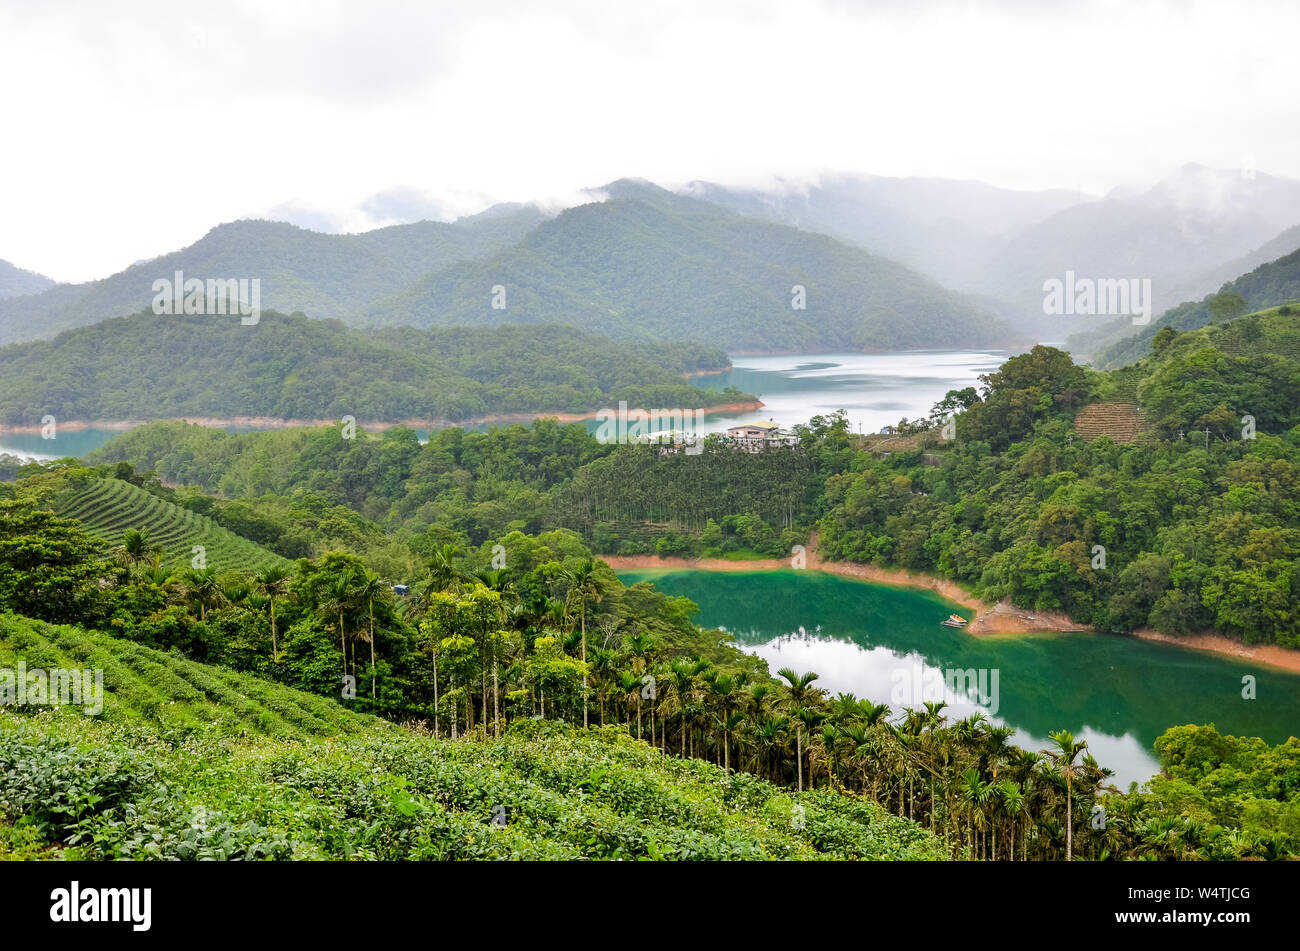 Beautiful landscape by Thousand Island Lake with Pinglin Tea Plantation in Taiwan. Surrounded by green tropical forest. Turquoise water. Moody weather. Amazing China, Asia. Stock Photo